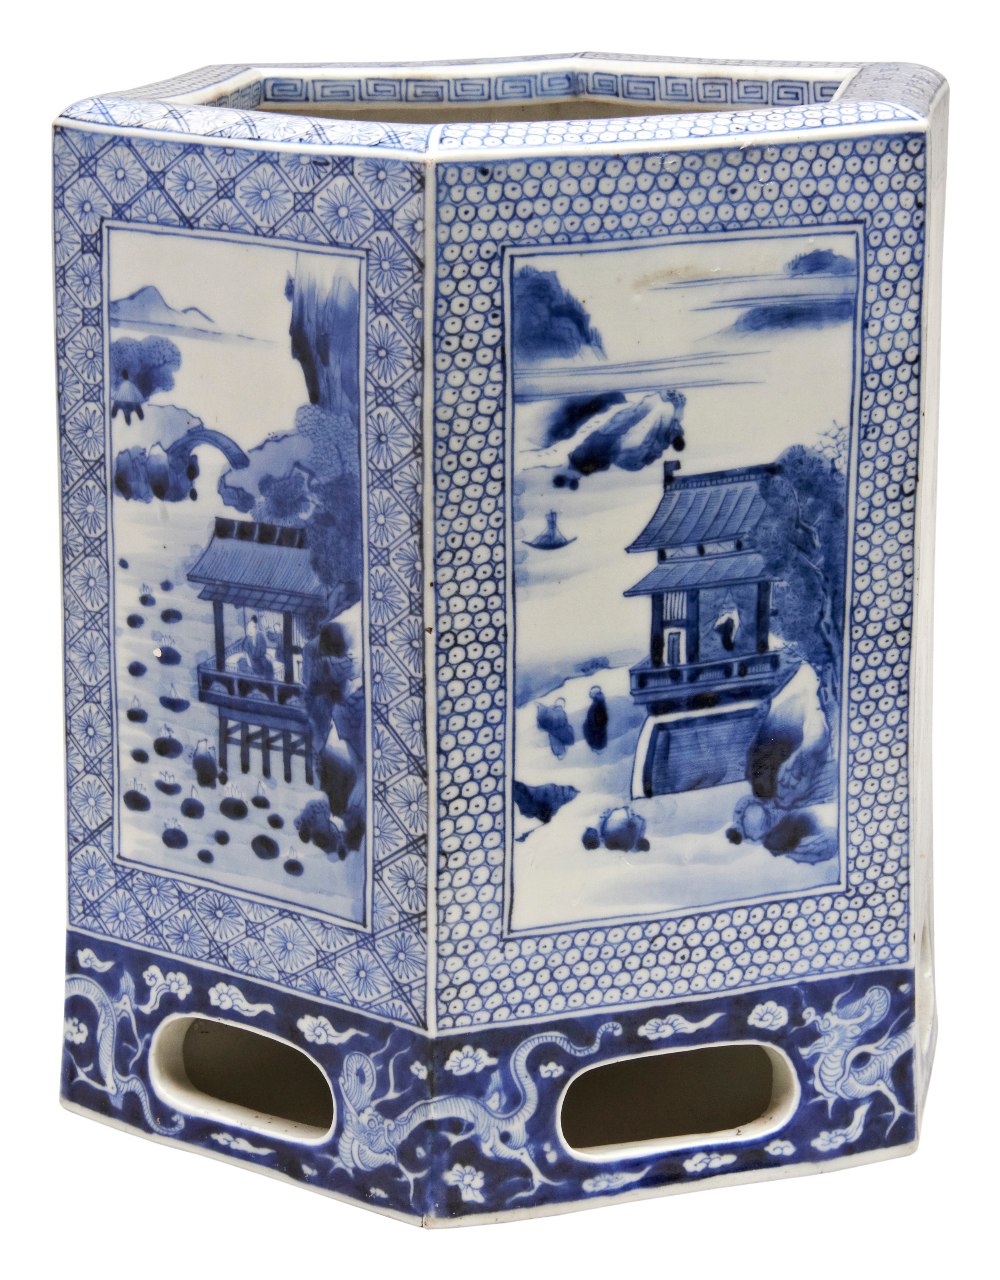 LARGE BLUE AND WHITE HEXAGONAL JARDINIERE QING DYNASTY, 19TH CENTURY the sides finely painted